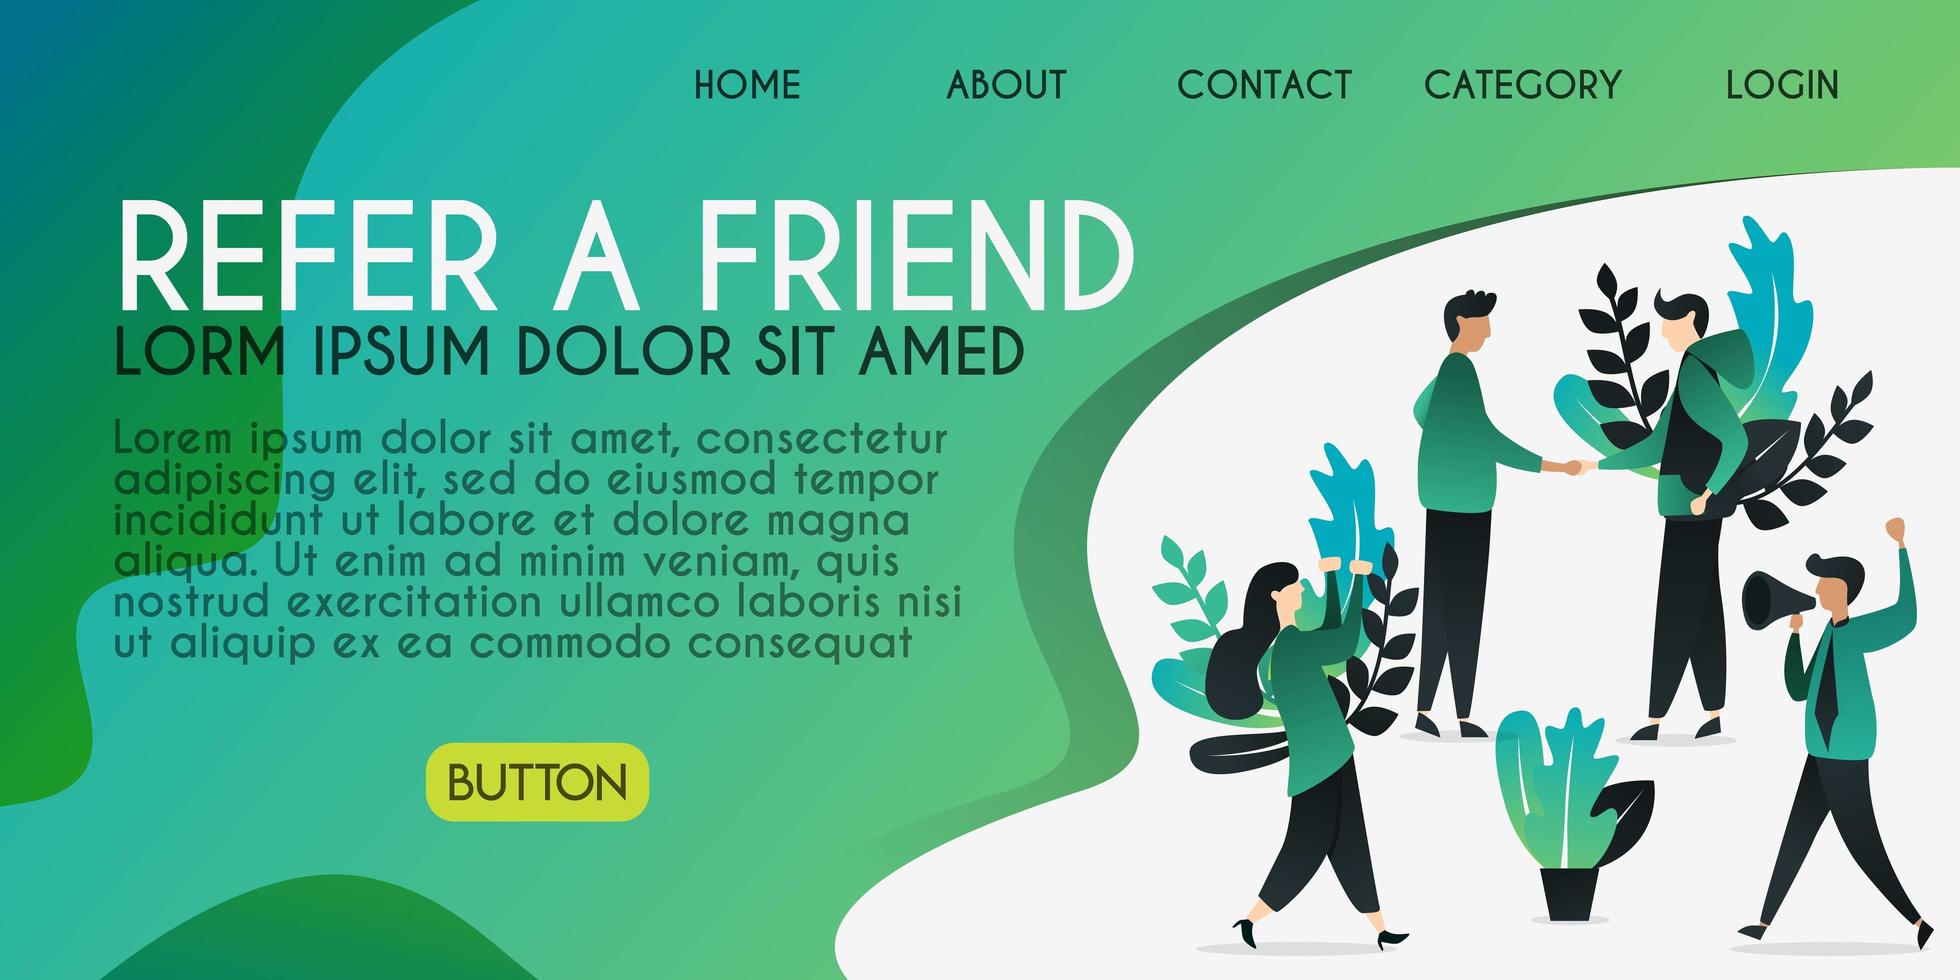 Refer a friend vector illustration concept, people are hand shaking with refer a friend word, , can use for, landing page, template, ui, web, mobile app, poster, banner, flyer